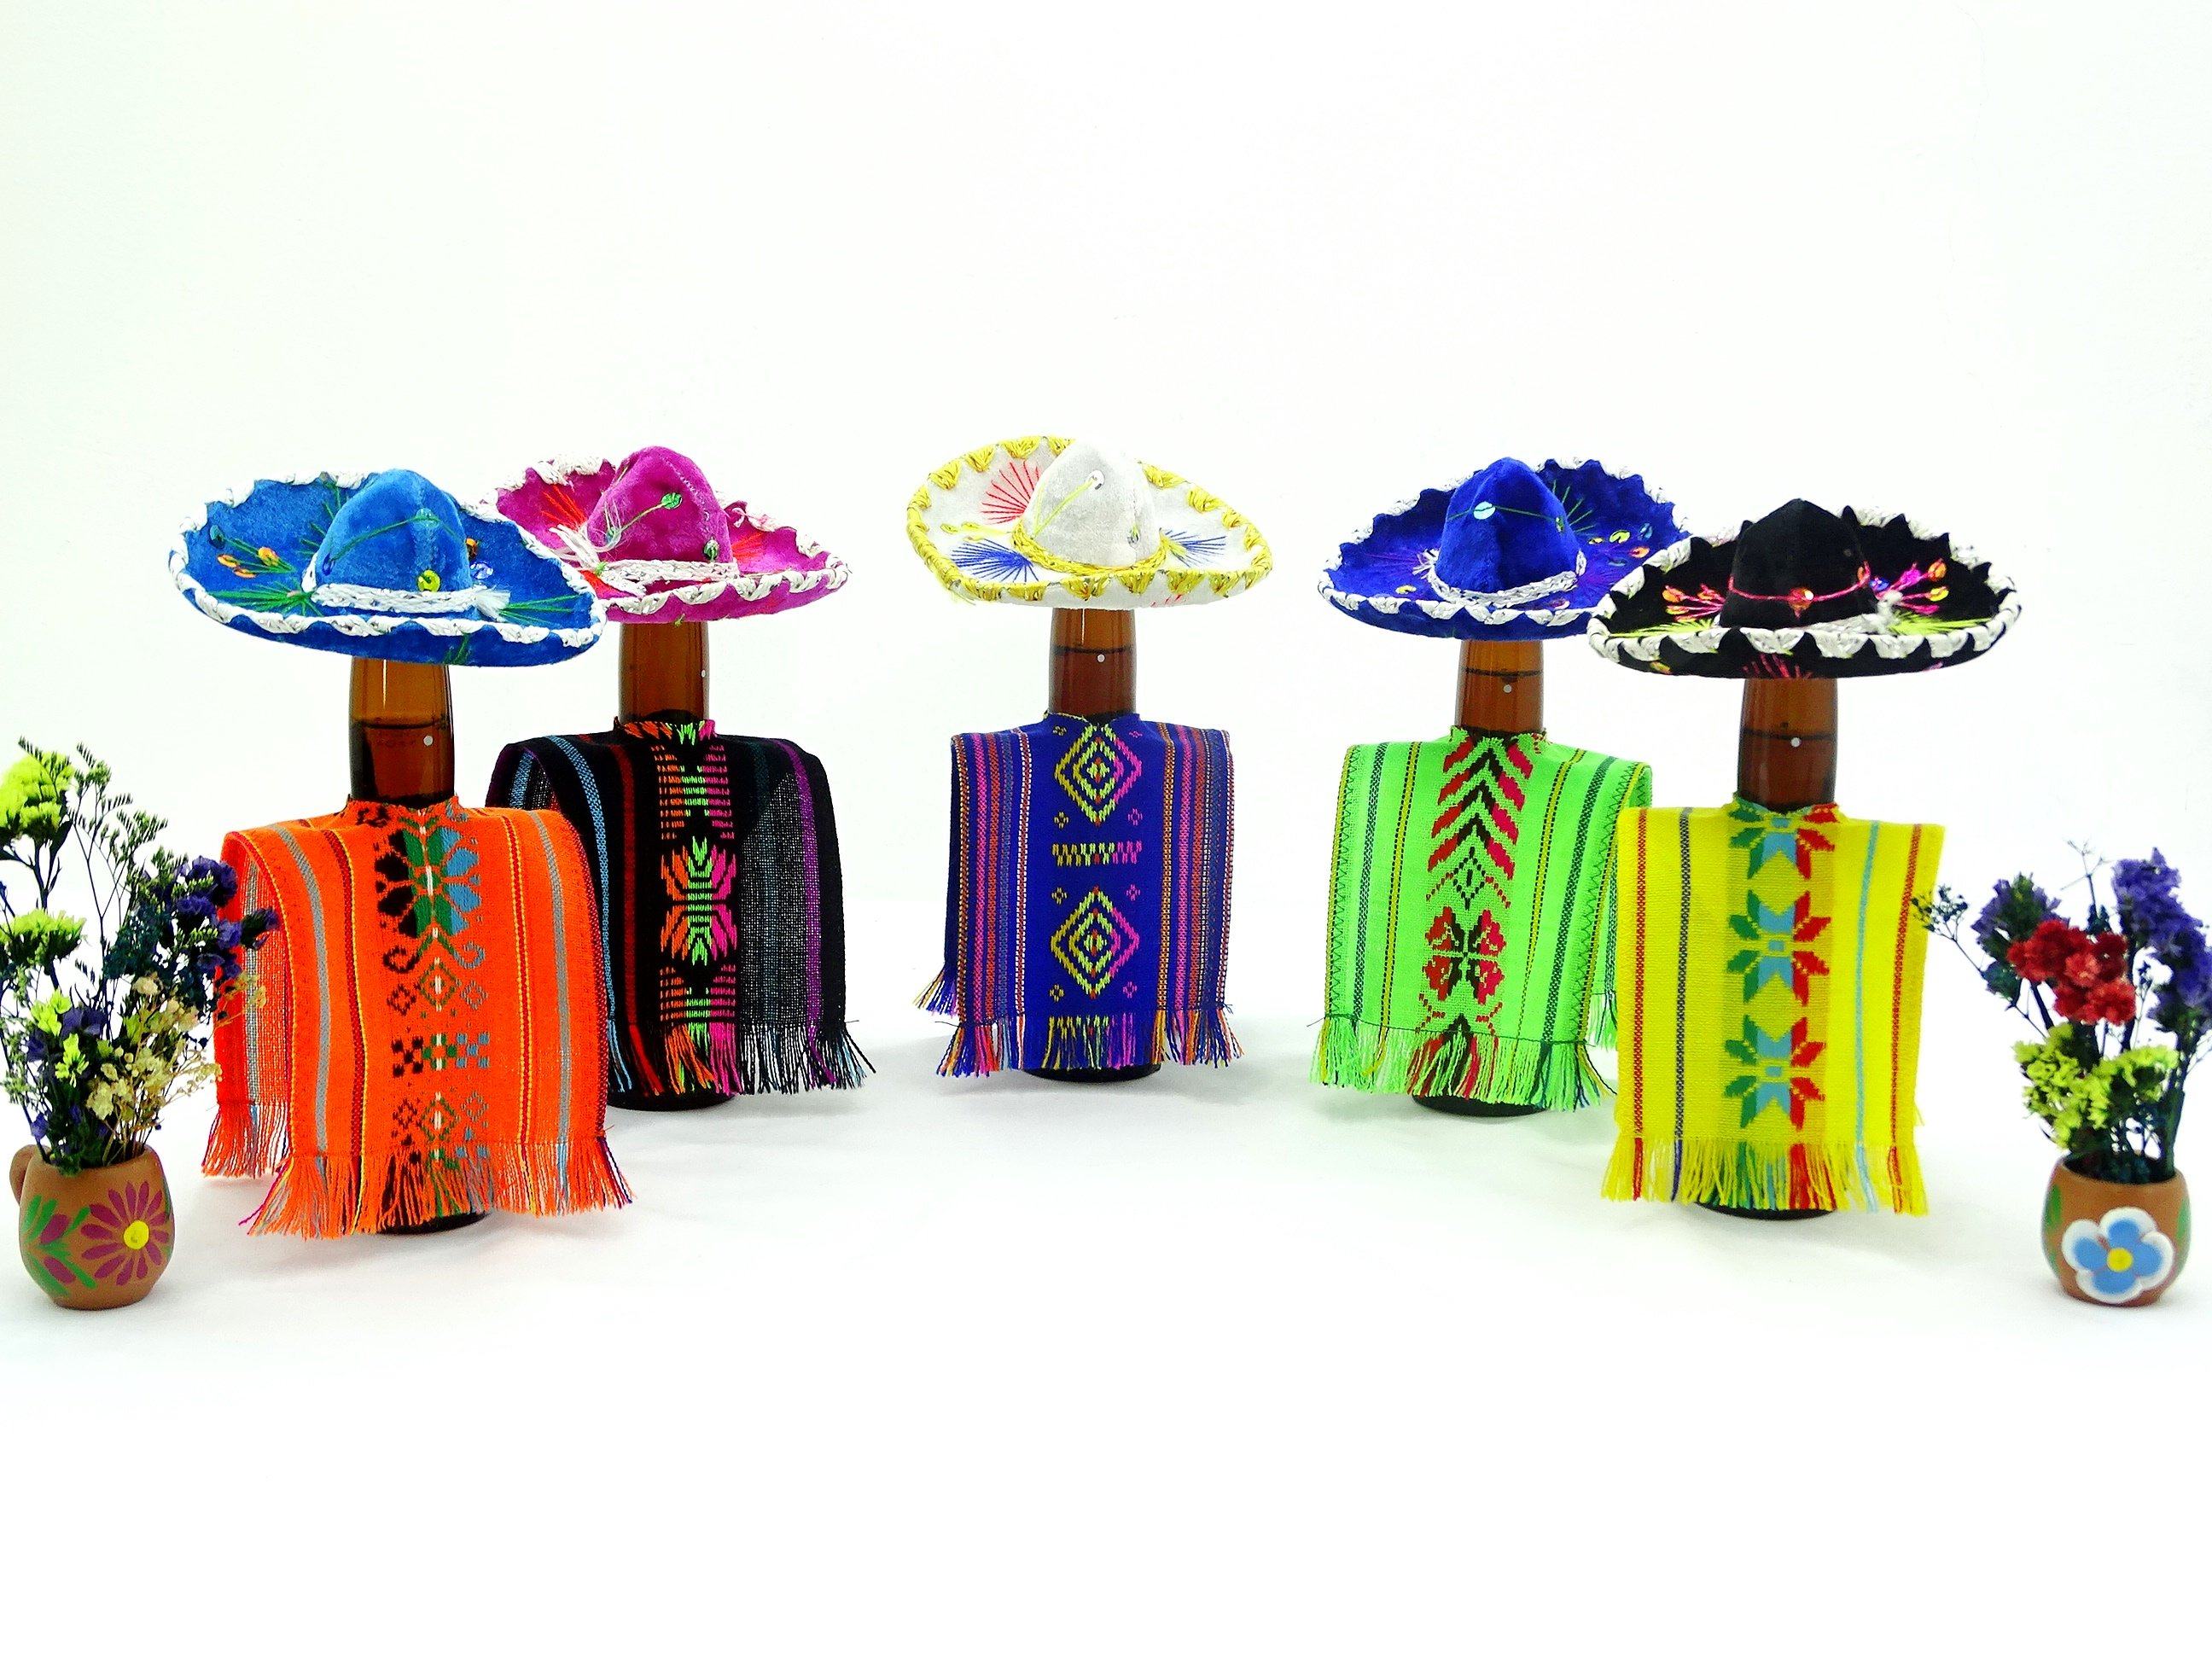 Authentic Fiesta Bottle Covers in Assorted Colors (10 Pack) – FIESTACONNECT